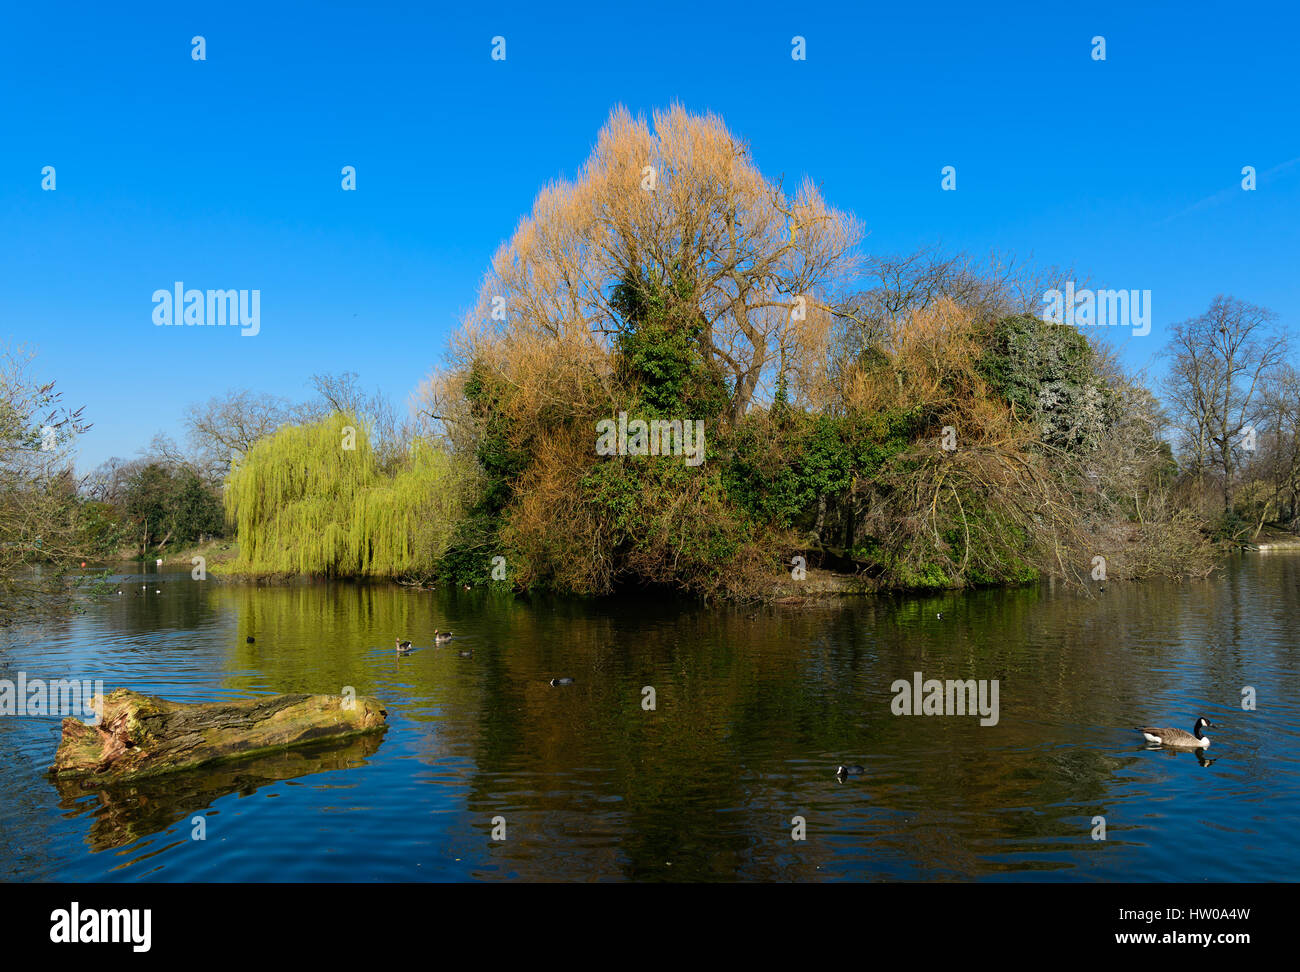 London, UK. 15th March 2017. An early taste of spring at Victoria Park, Bow, Greater London where the temperature hit 17 degrees centigrade. Credit: John Eveson/Alamy Live News Stock Photo